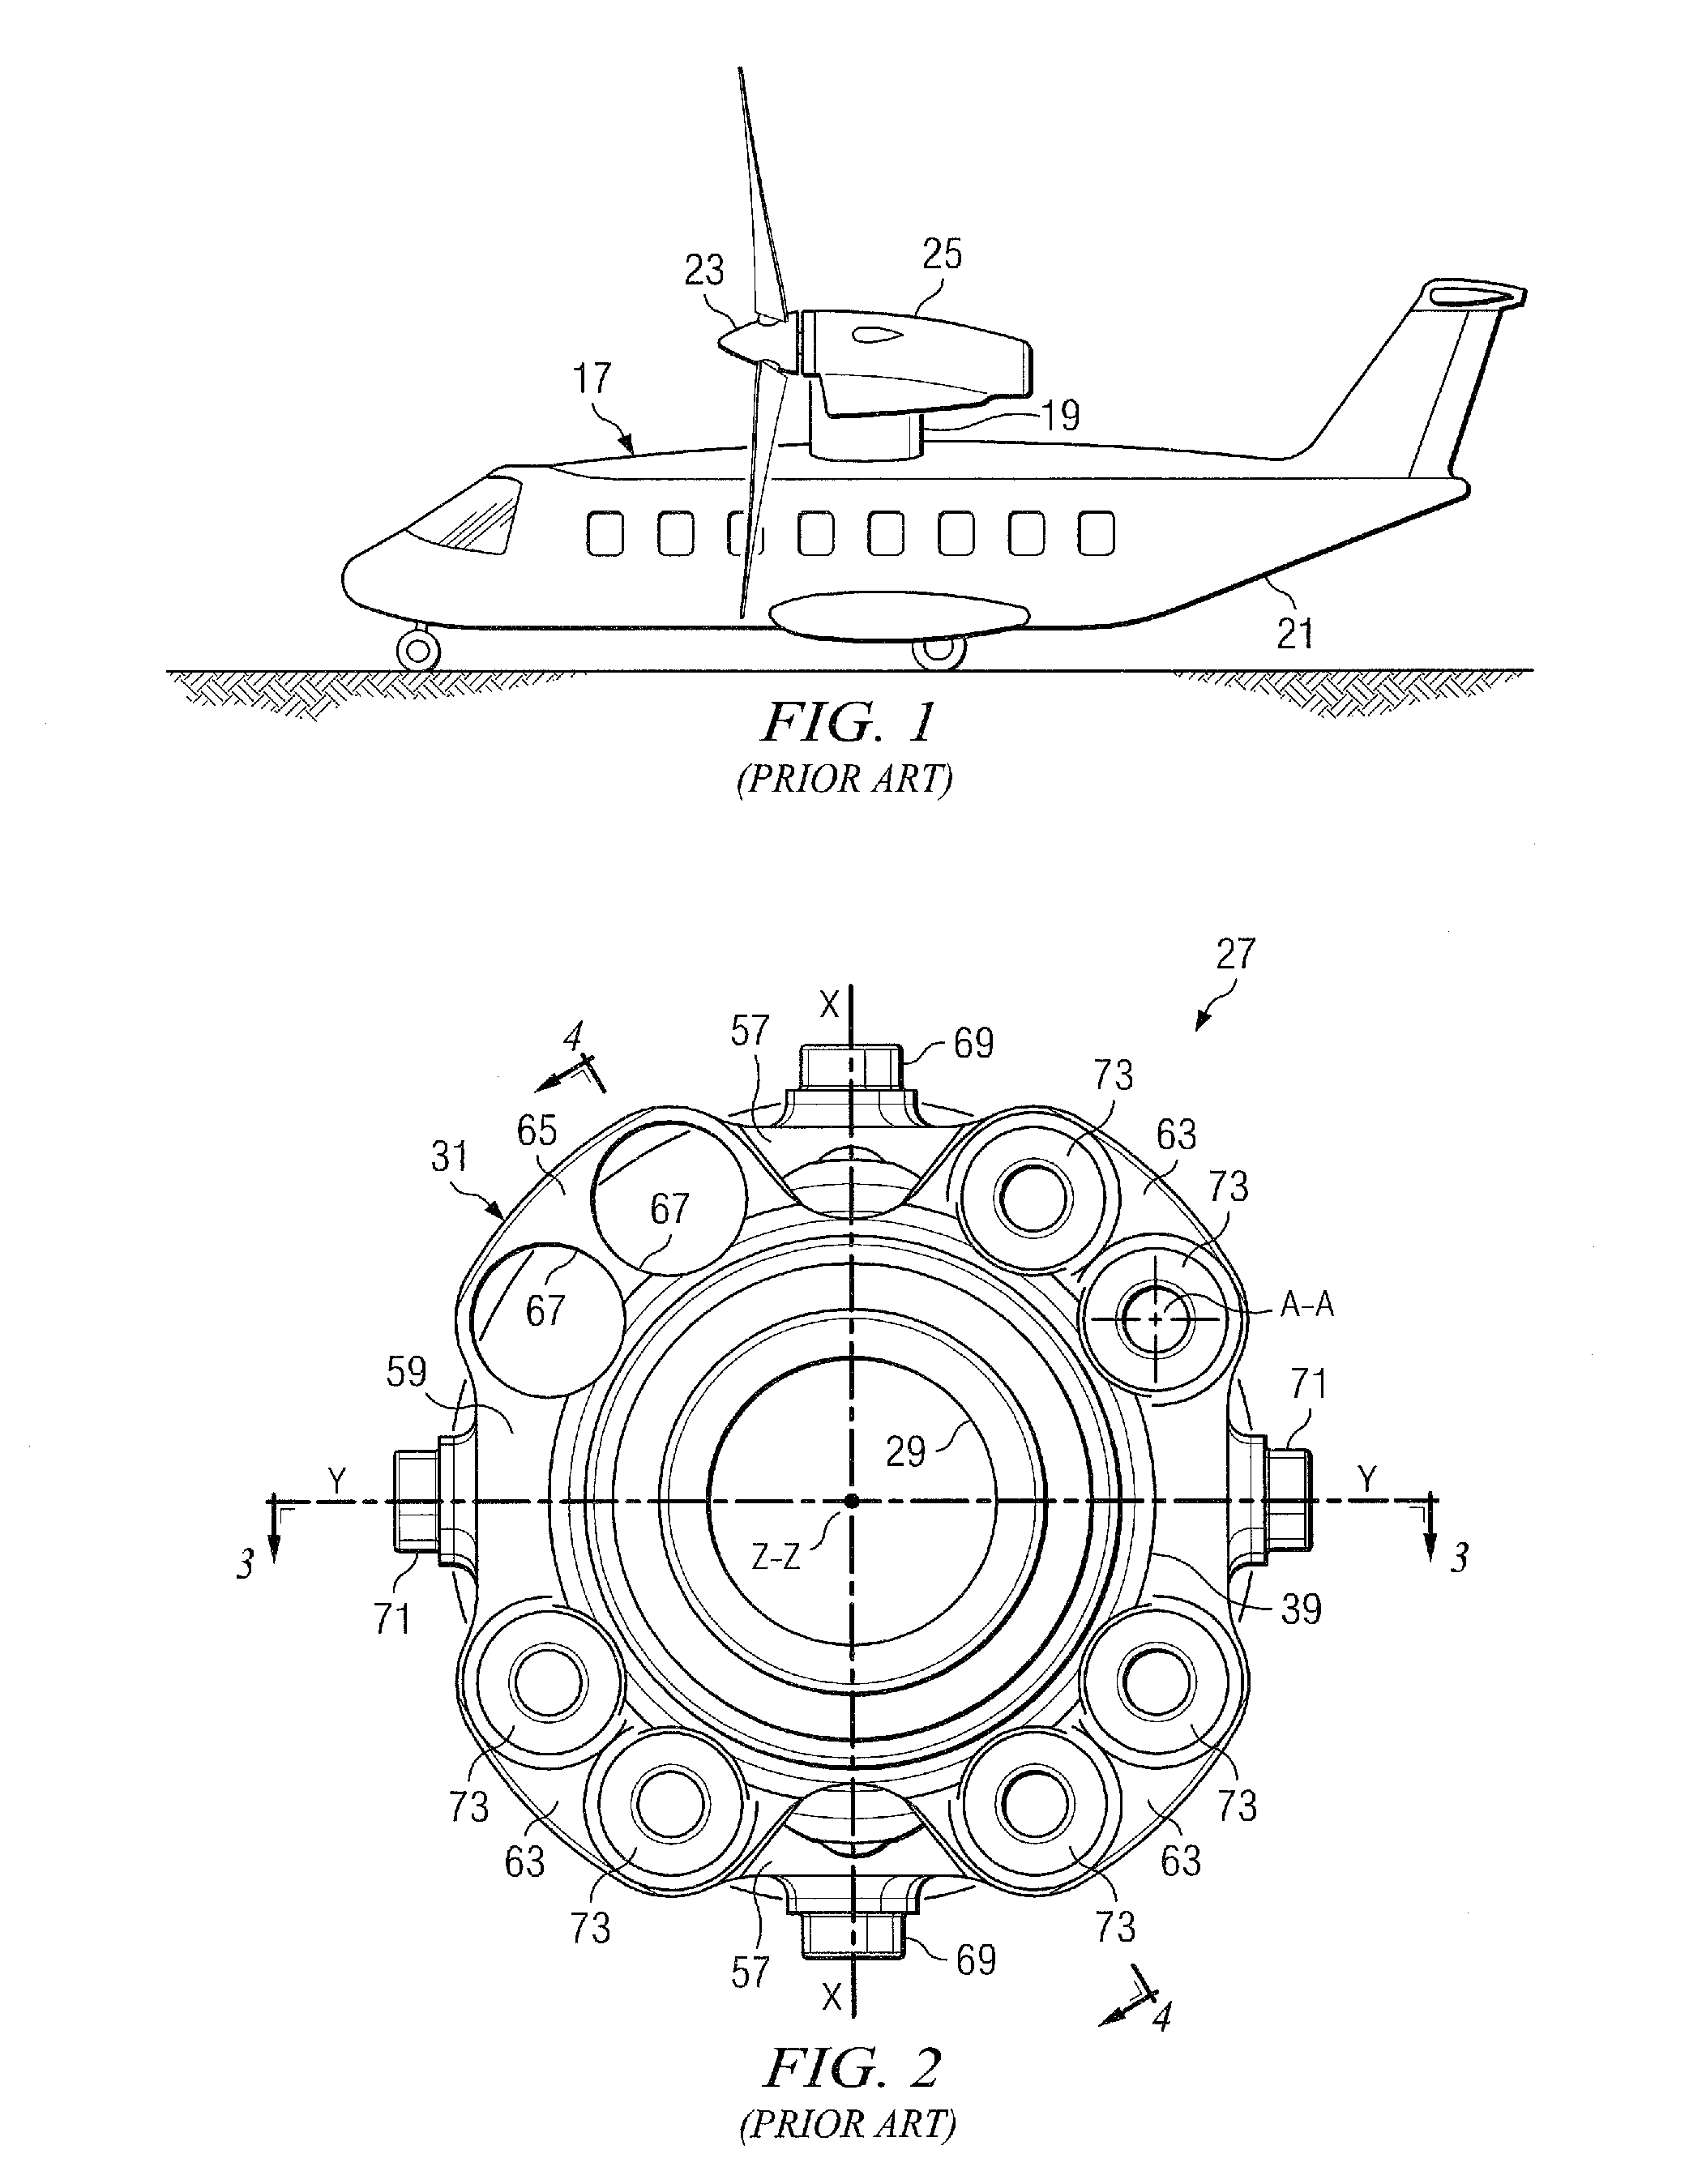 Constant-velocity drive system for gimbaled rotor hubs